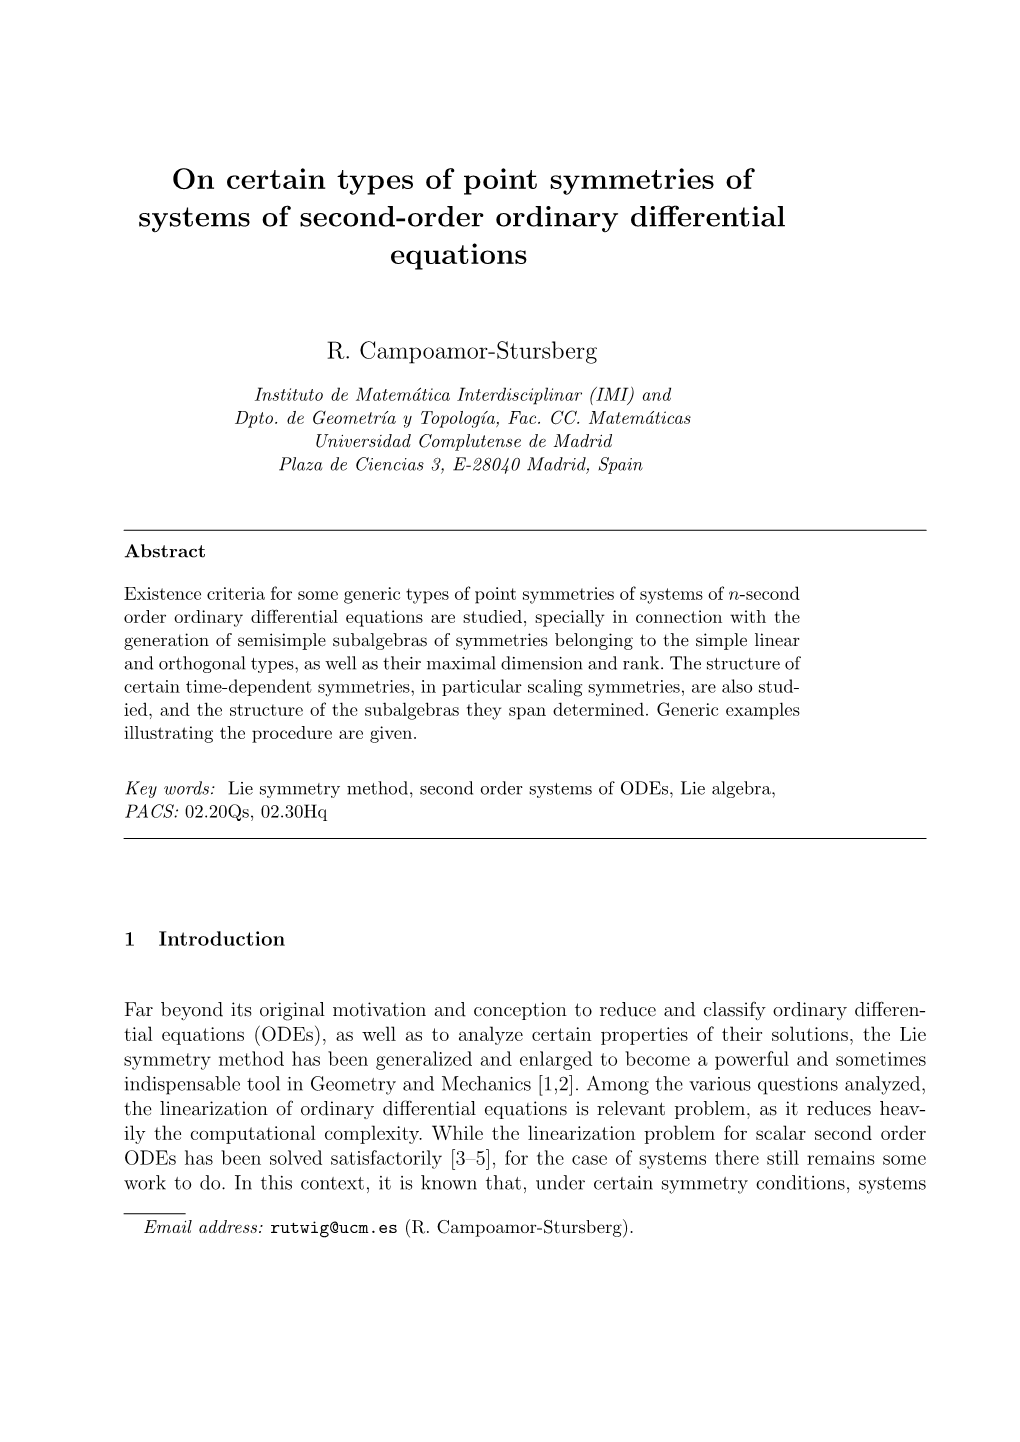 On Certain Types of Point Symmetries of Systems of Second-Order Ordinary Diﬀerential Equations